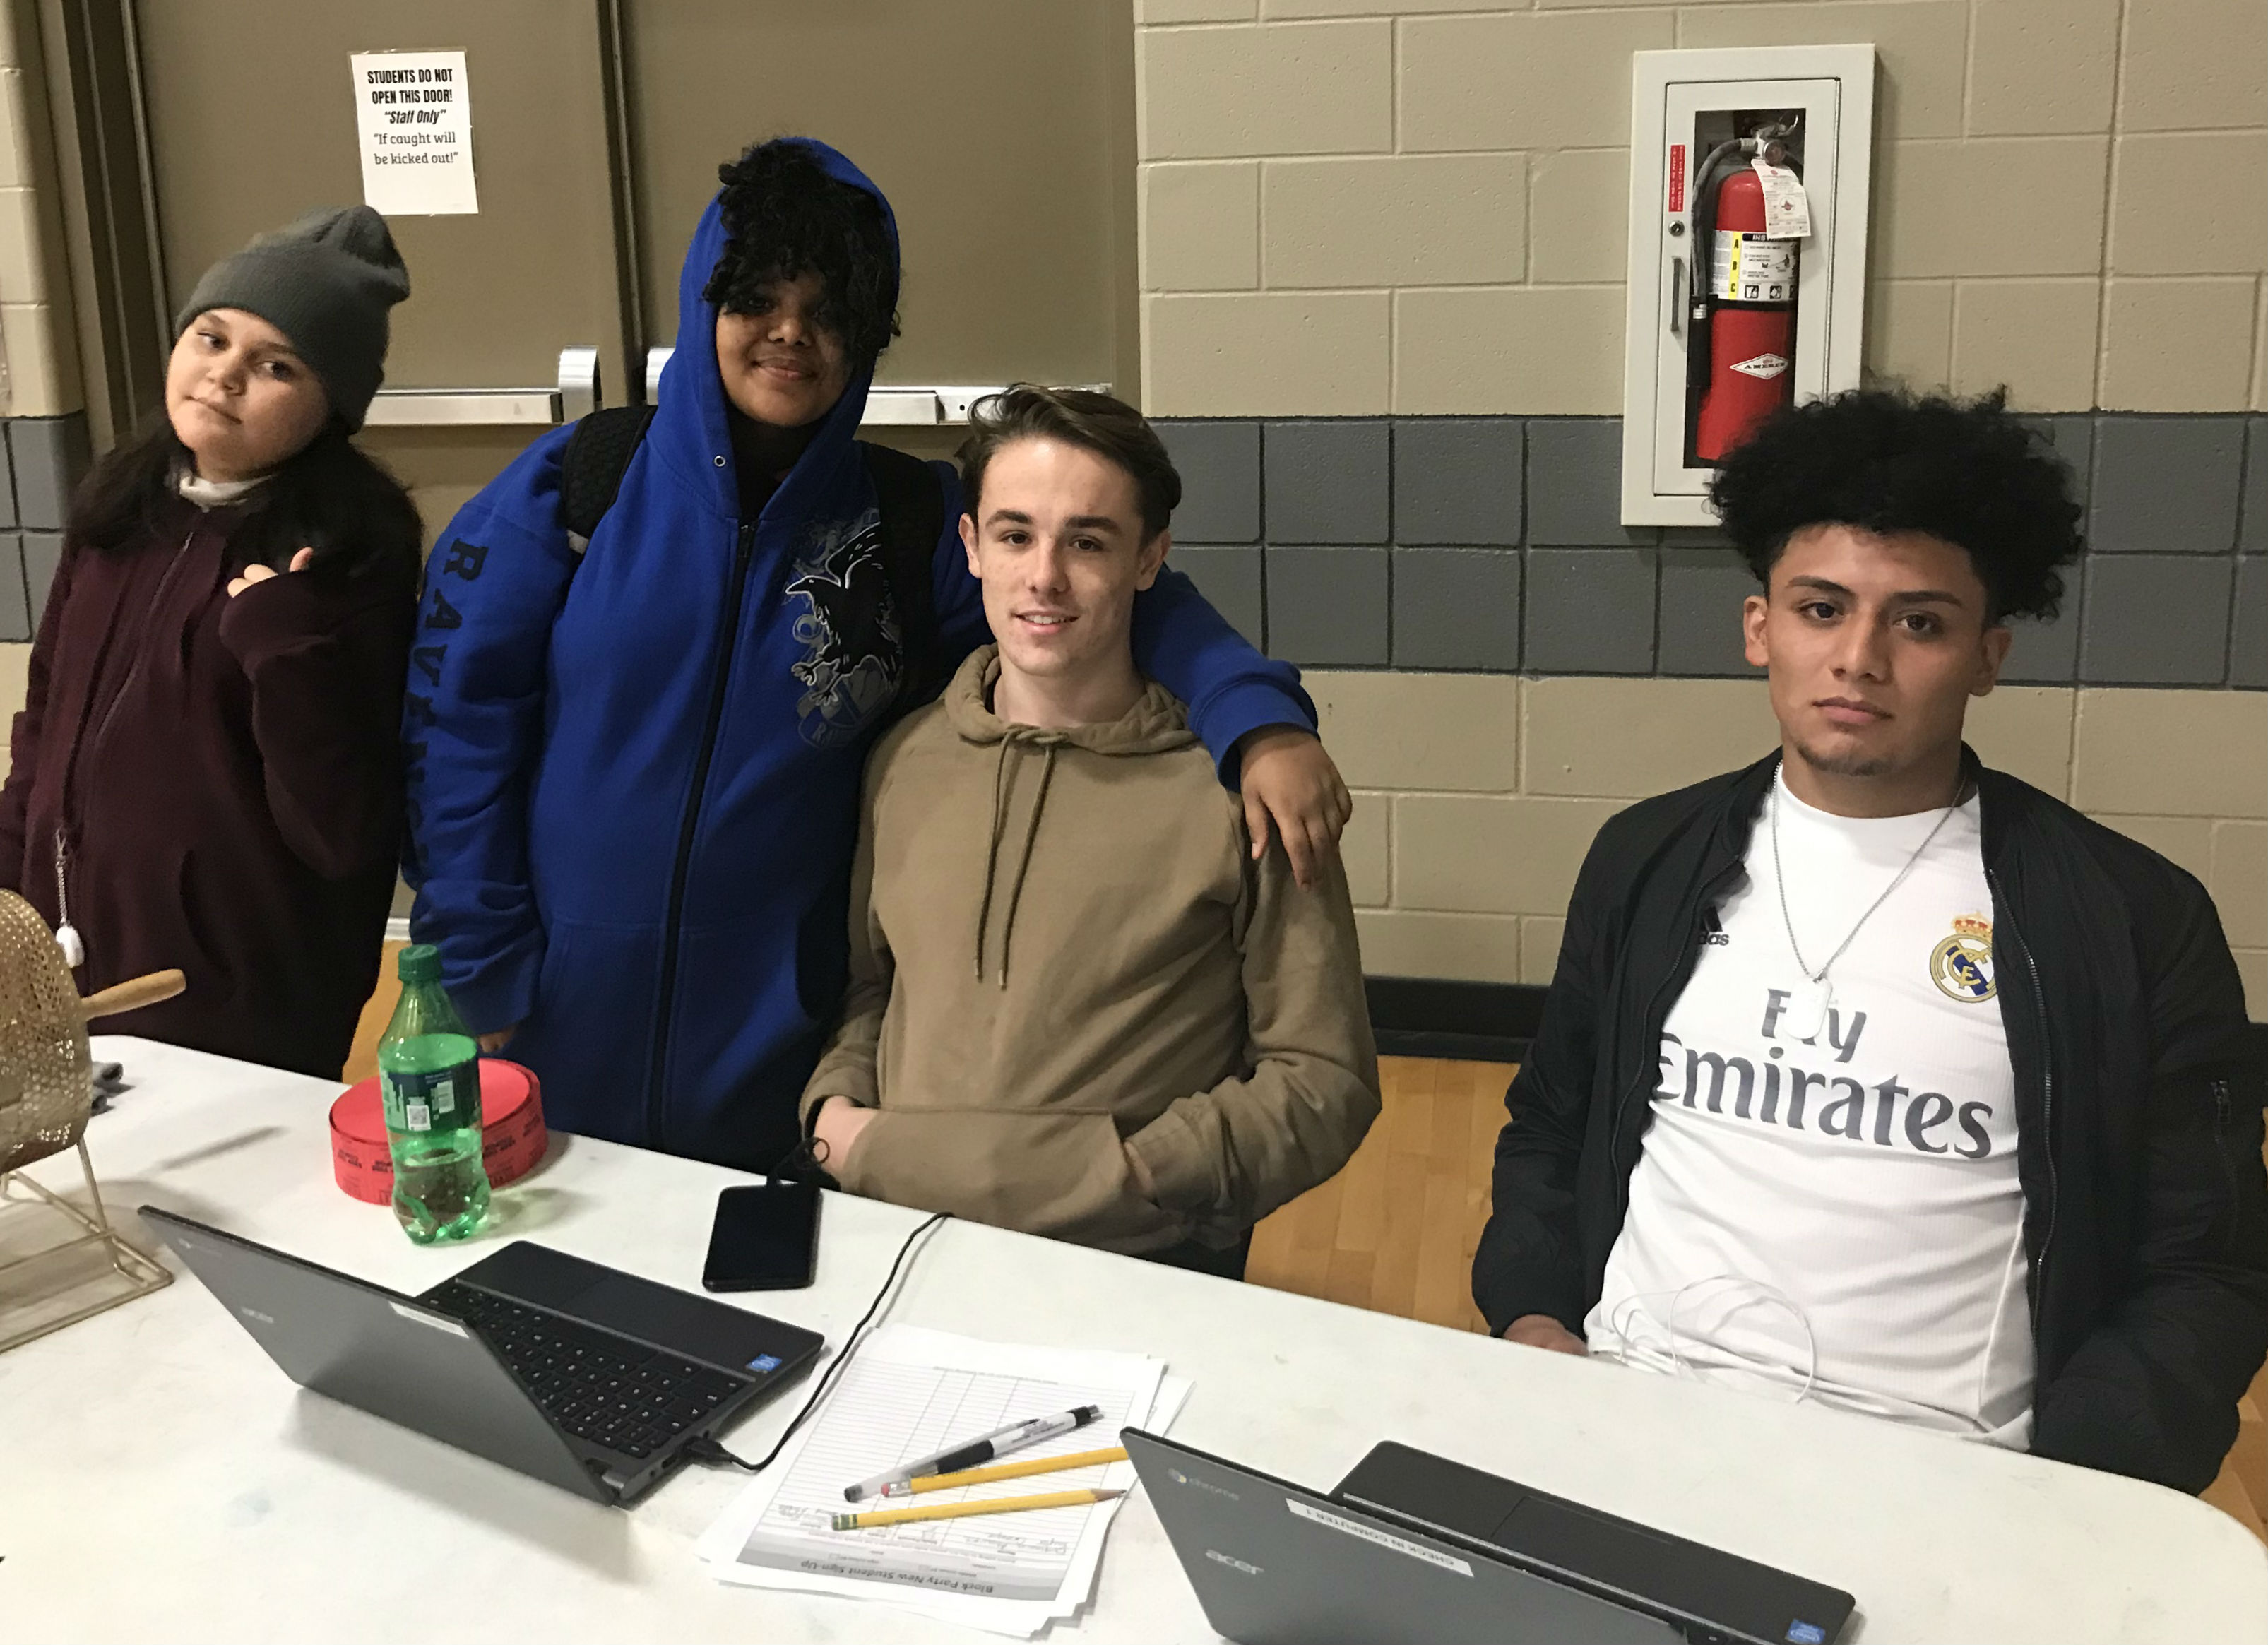 Olivia Ramirez, 11, Kharman Figueroa, 11, Michael Kollatz, 17, and Pedro Duarte, 16, were helping middle school youth sign up for a Nov. 12 block party at The Heights campus of STREETS Ministries.